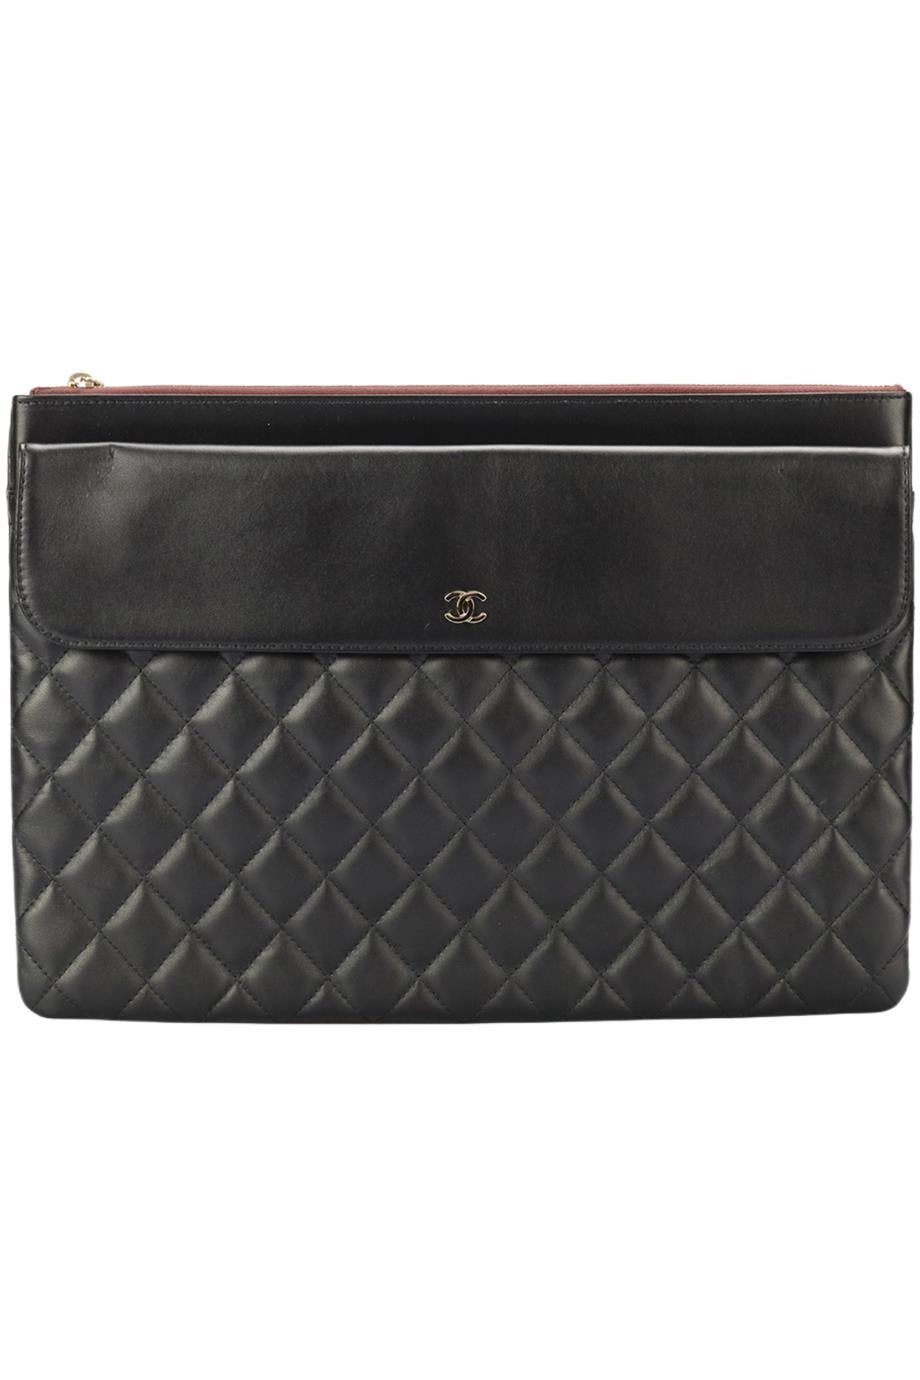 CHANEL 2017 FLP O-CASE LARGE QUILTED LEATHER CLUTCH